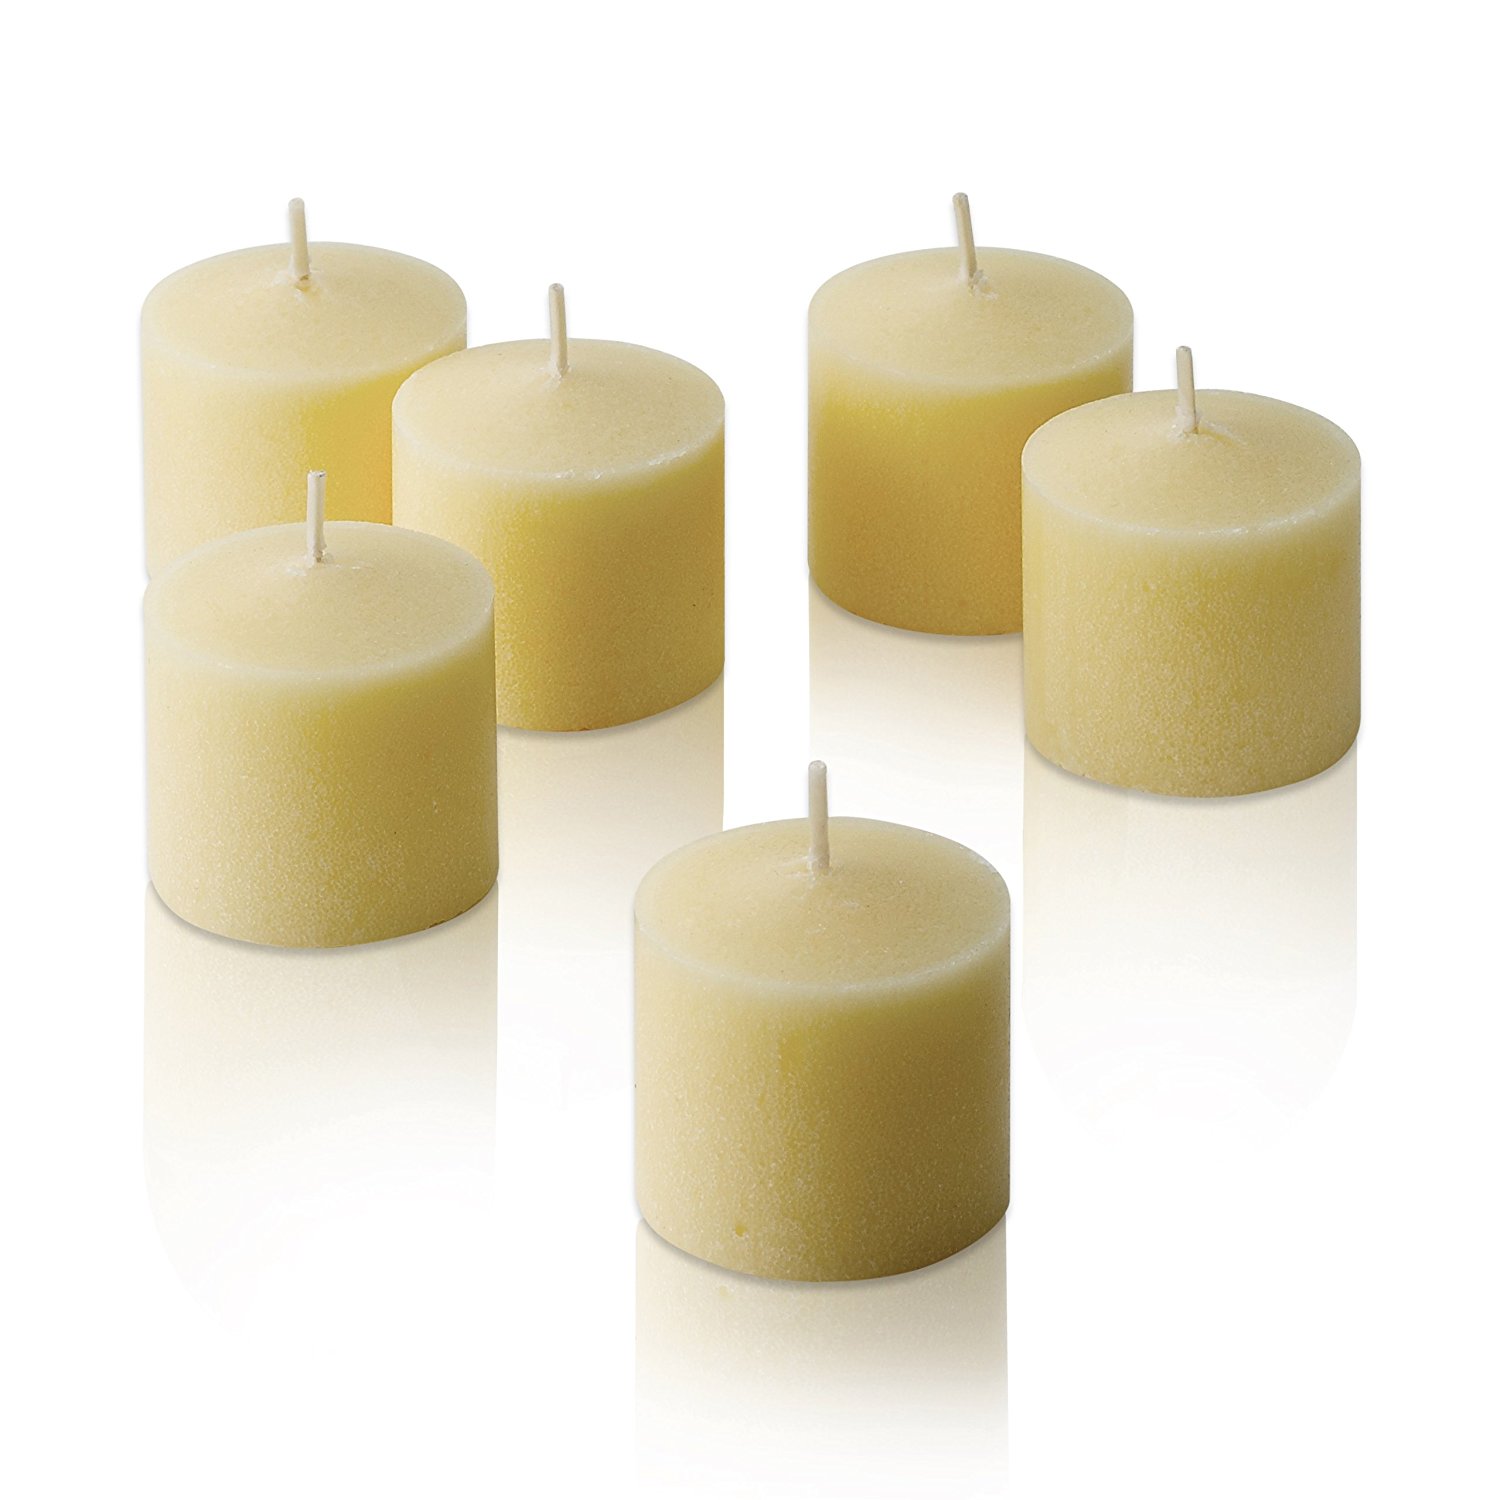 Amazon.com: French Vanilla Scented Candles - Bulk Set of 72 Scented ...